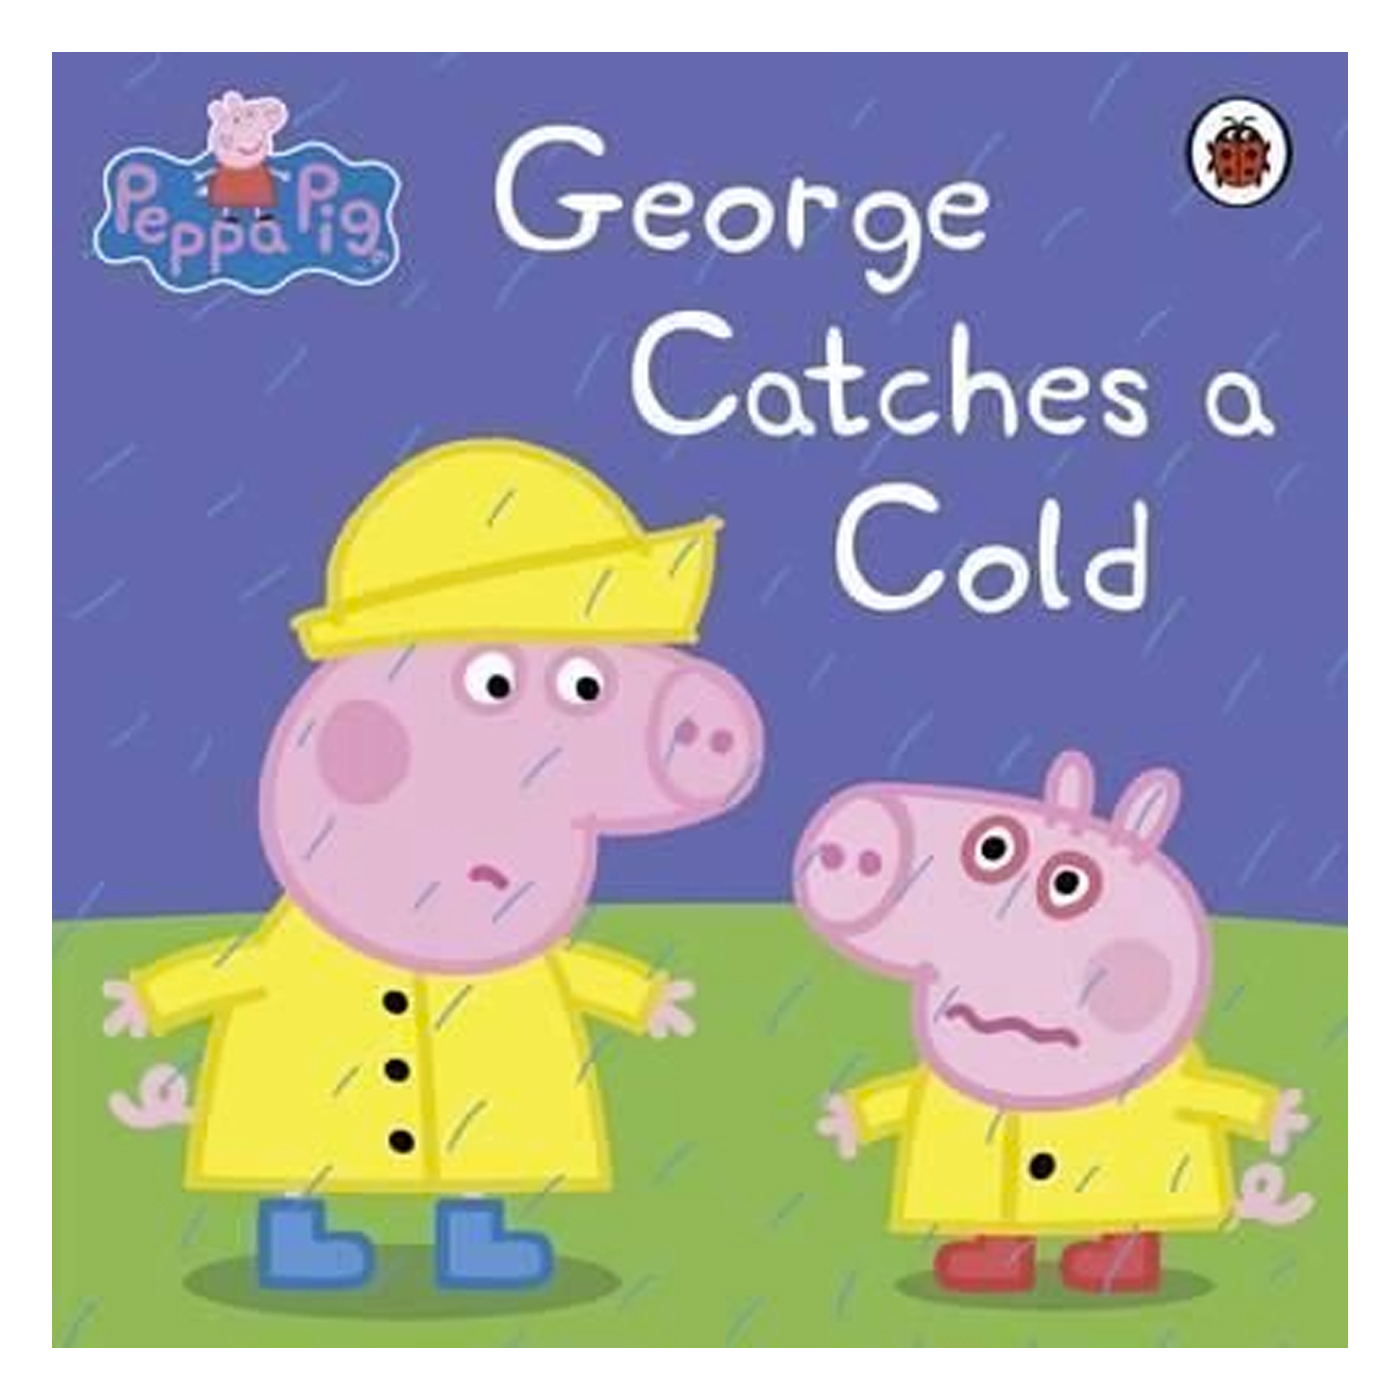  Peppa Pig: George Catches a Cold